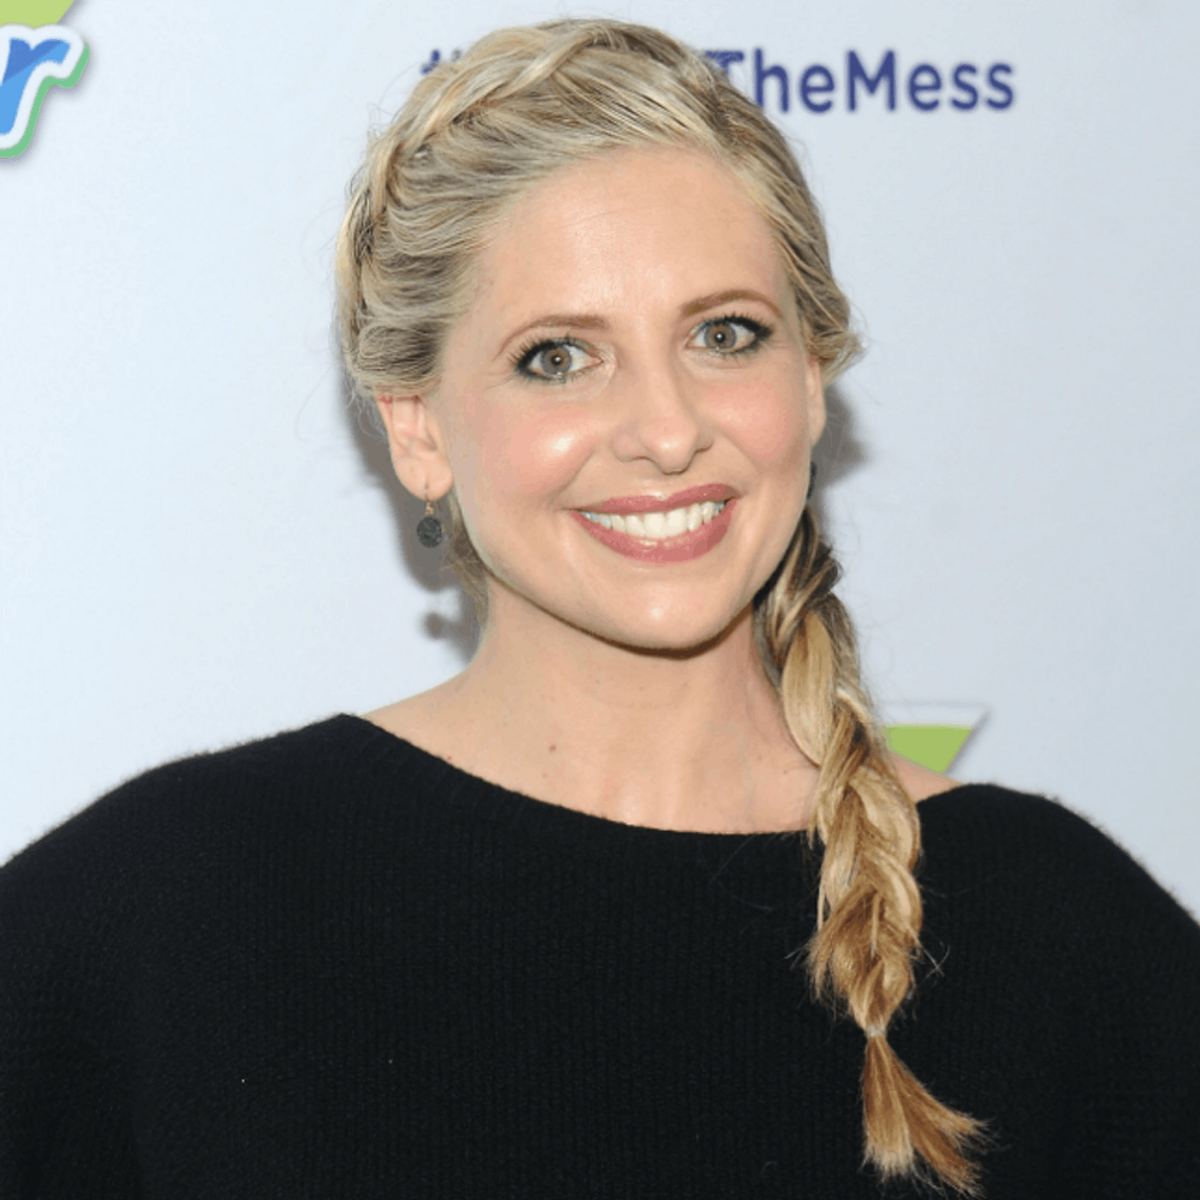 Sarah Michelle Gellar’s Dramatic Hair Color Change Is a Cruel Intentions Throwback